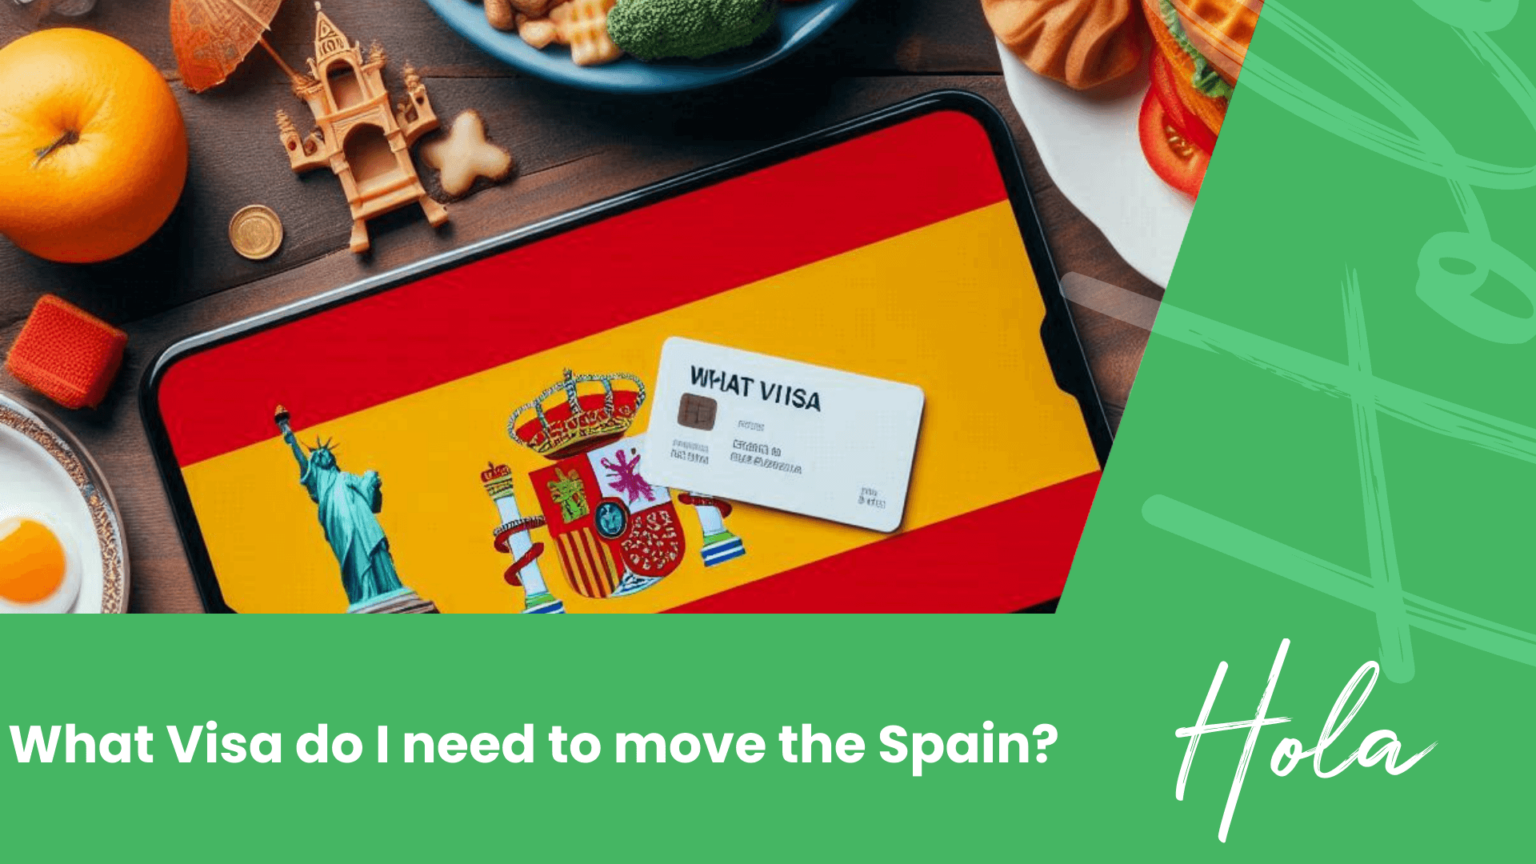 What visa do I need to move to Spain